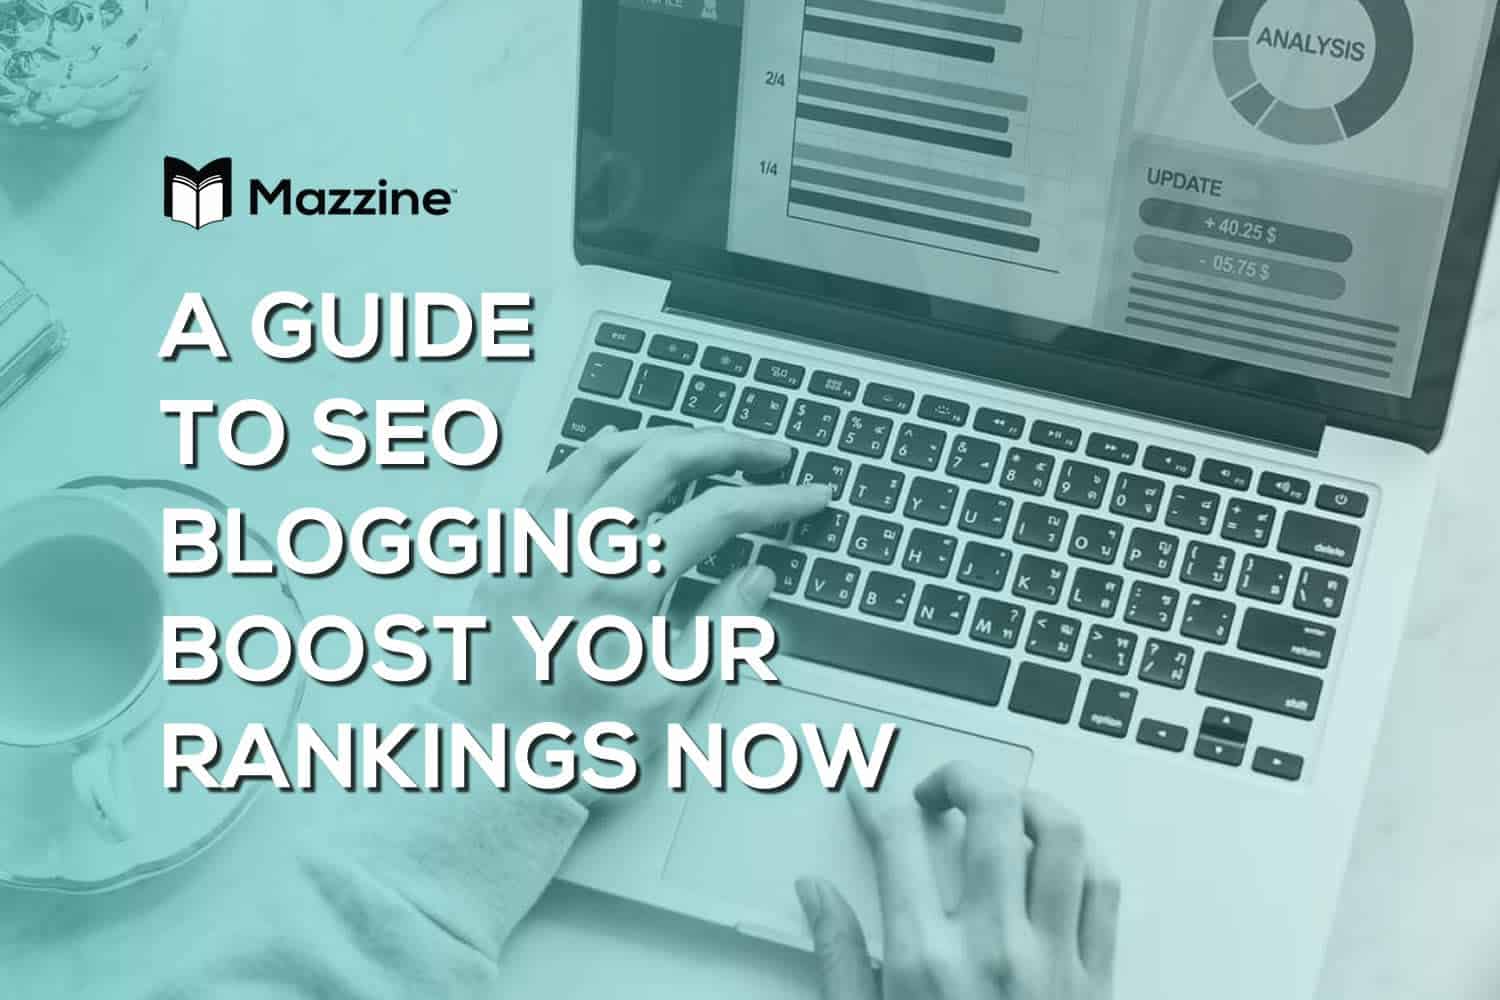 A Guide to SEO Blogging - Boost Your Rankings Now